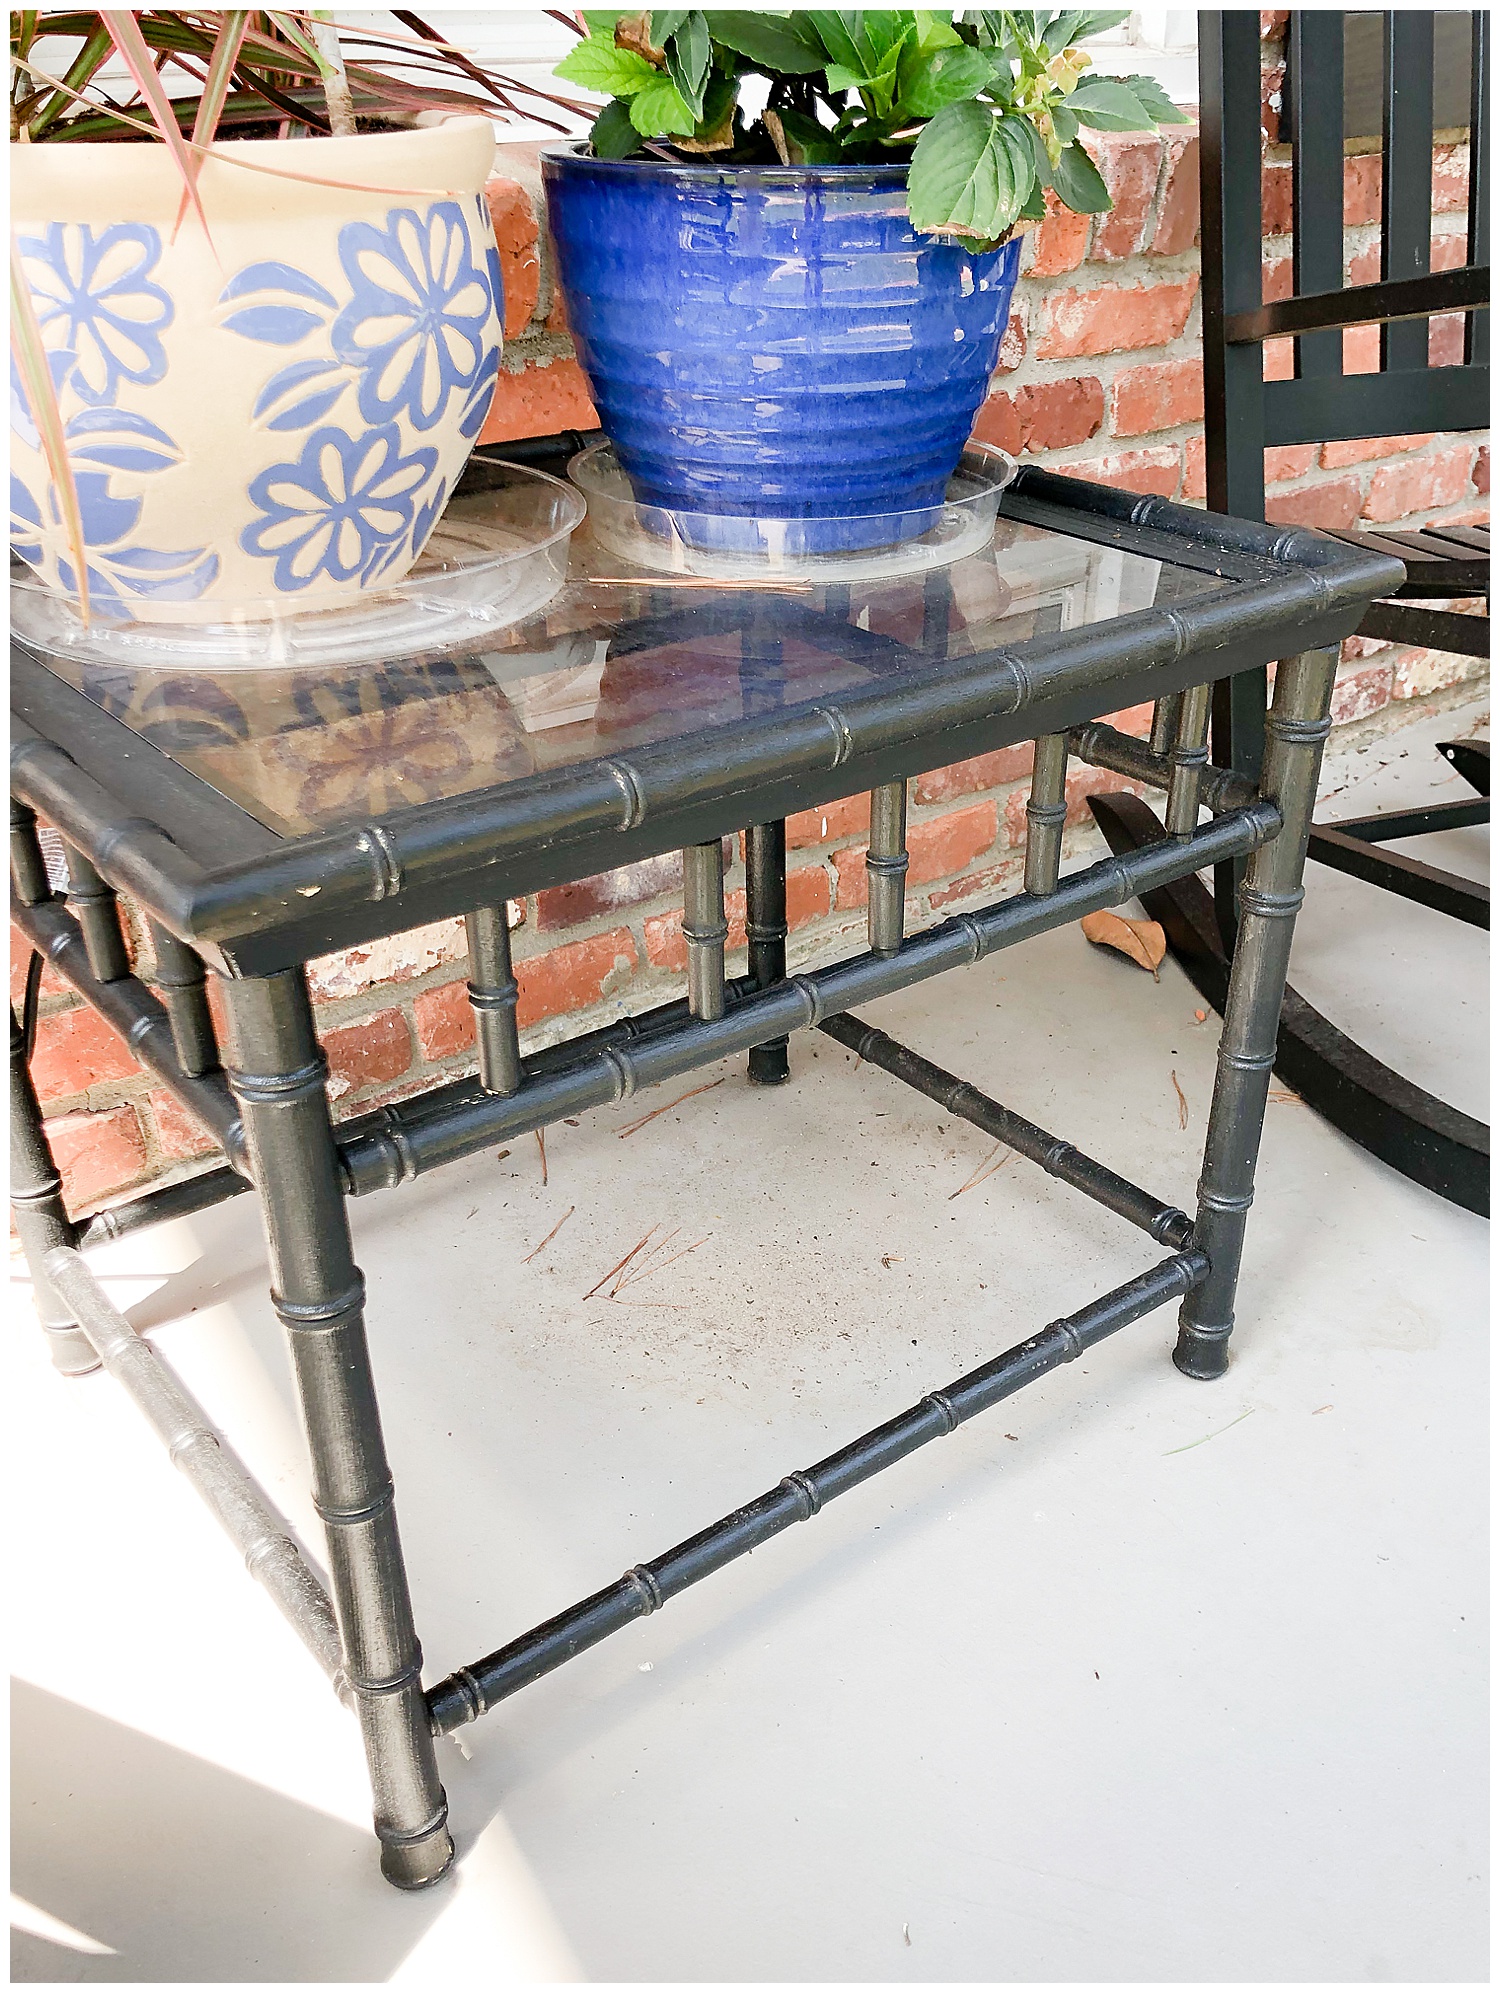 2 BAMBOO SIDE TABLES: $10 (WE PAINTED BLACK)